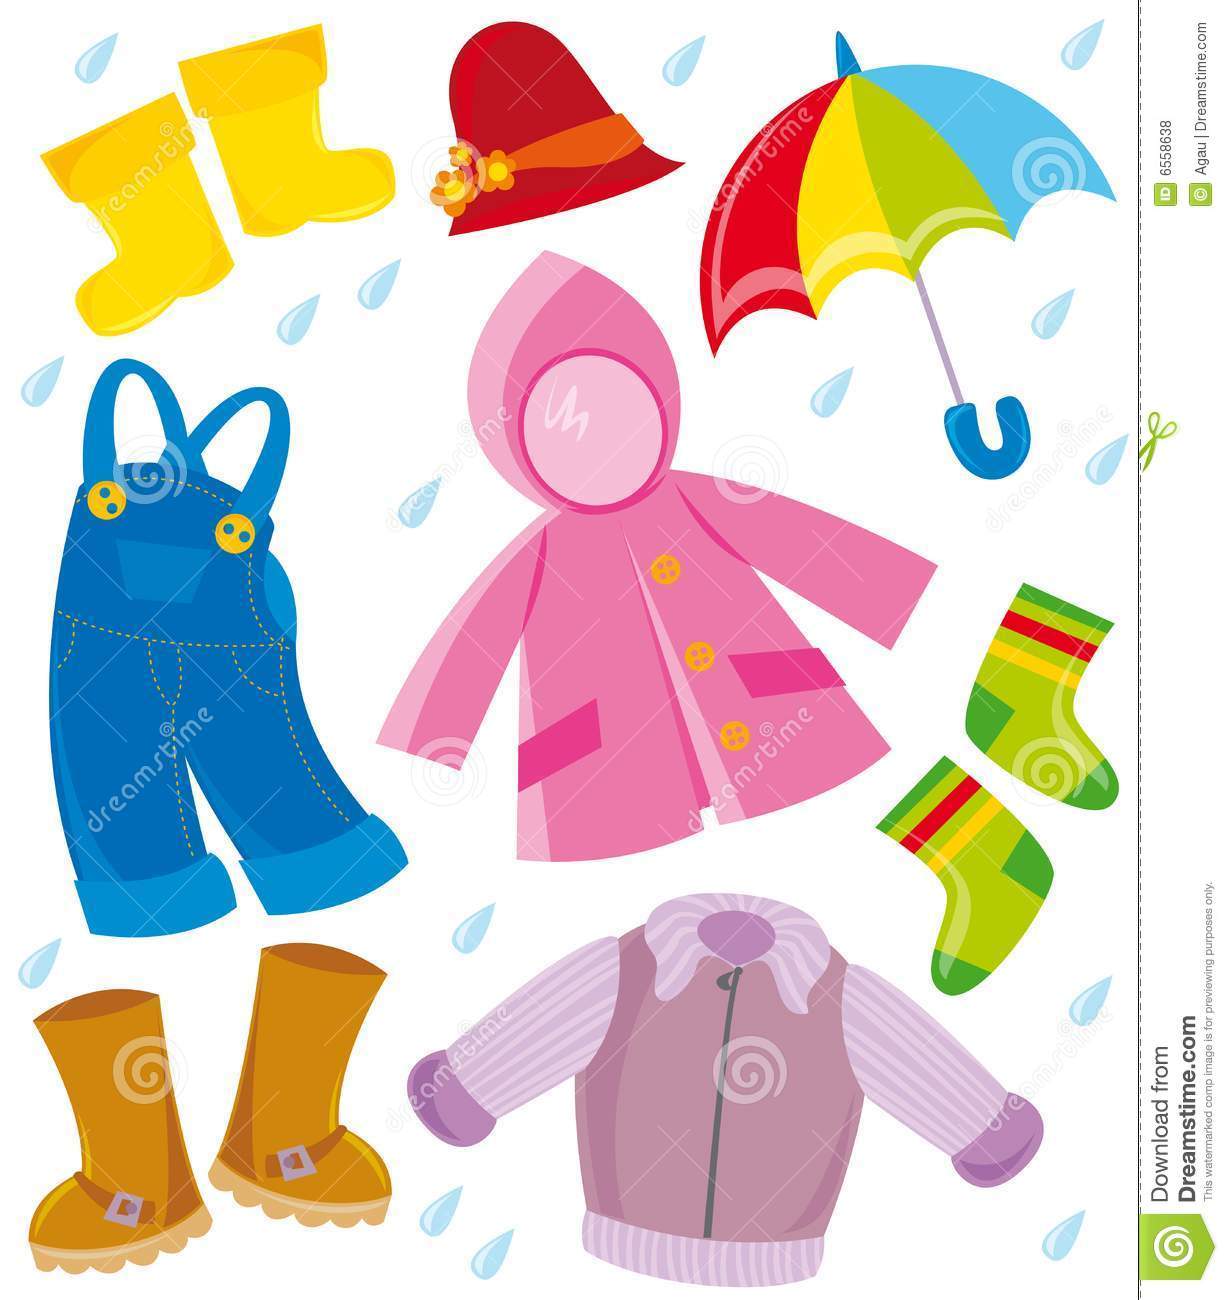 Spring clothing clipart.